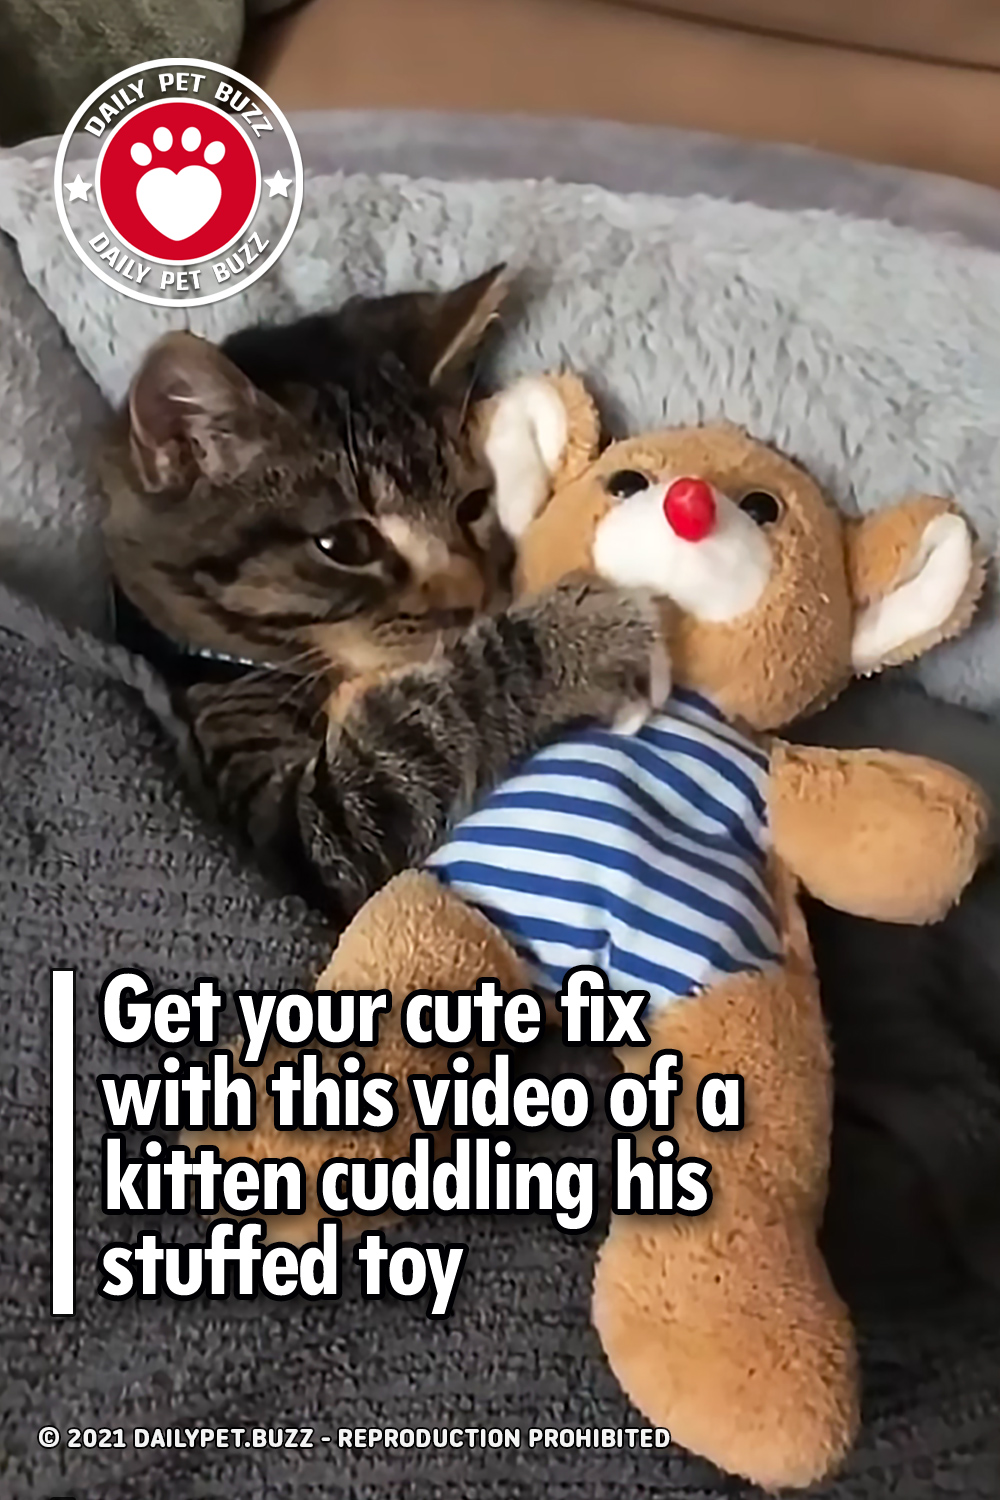 Get your cute fix with this video of a kitten cuddling his stuffed toy